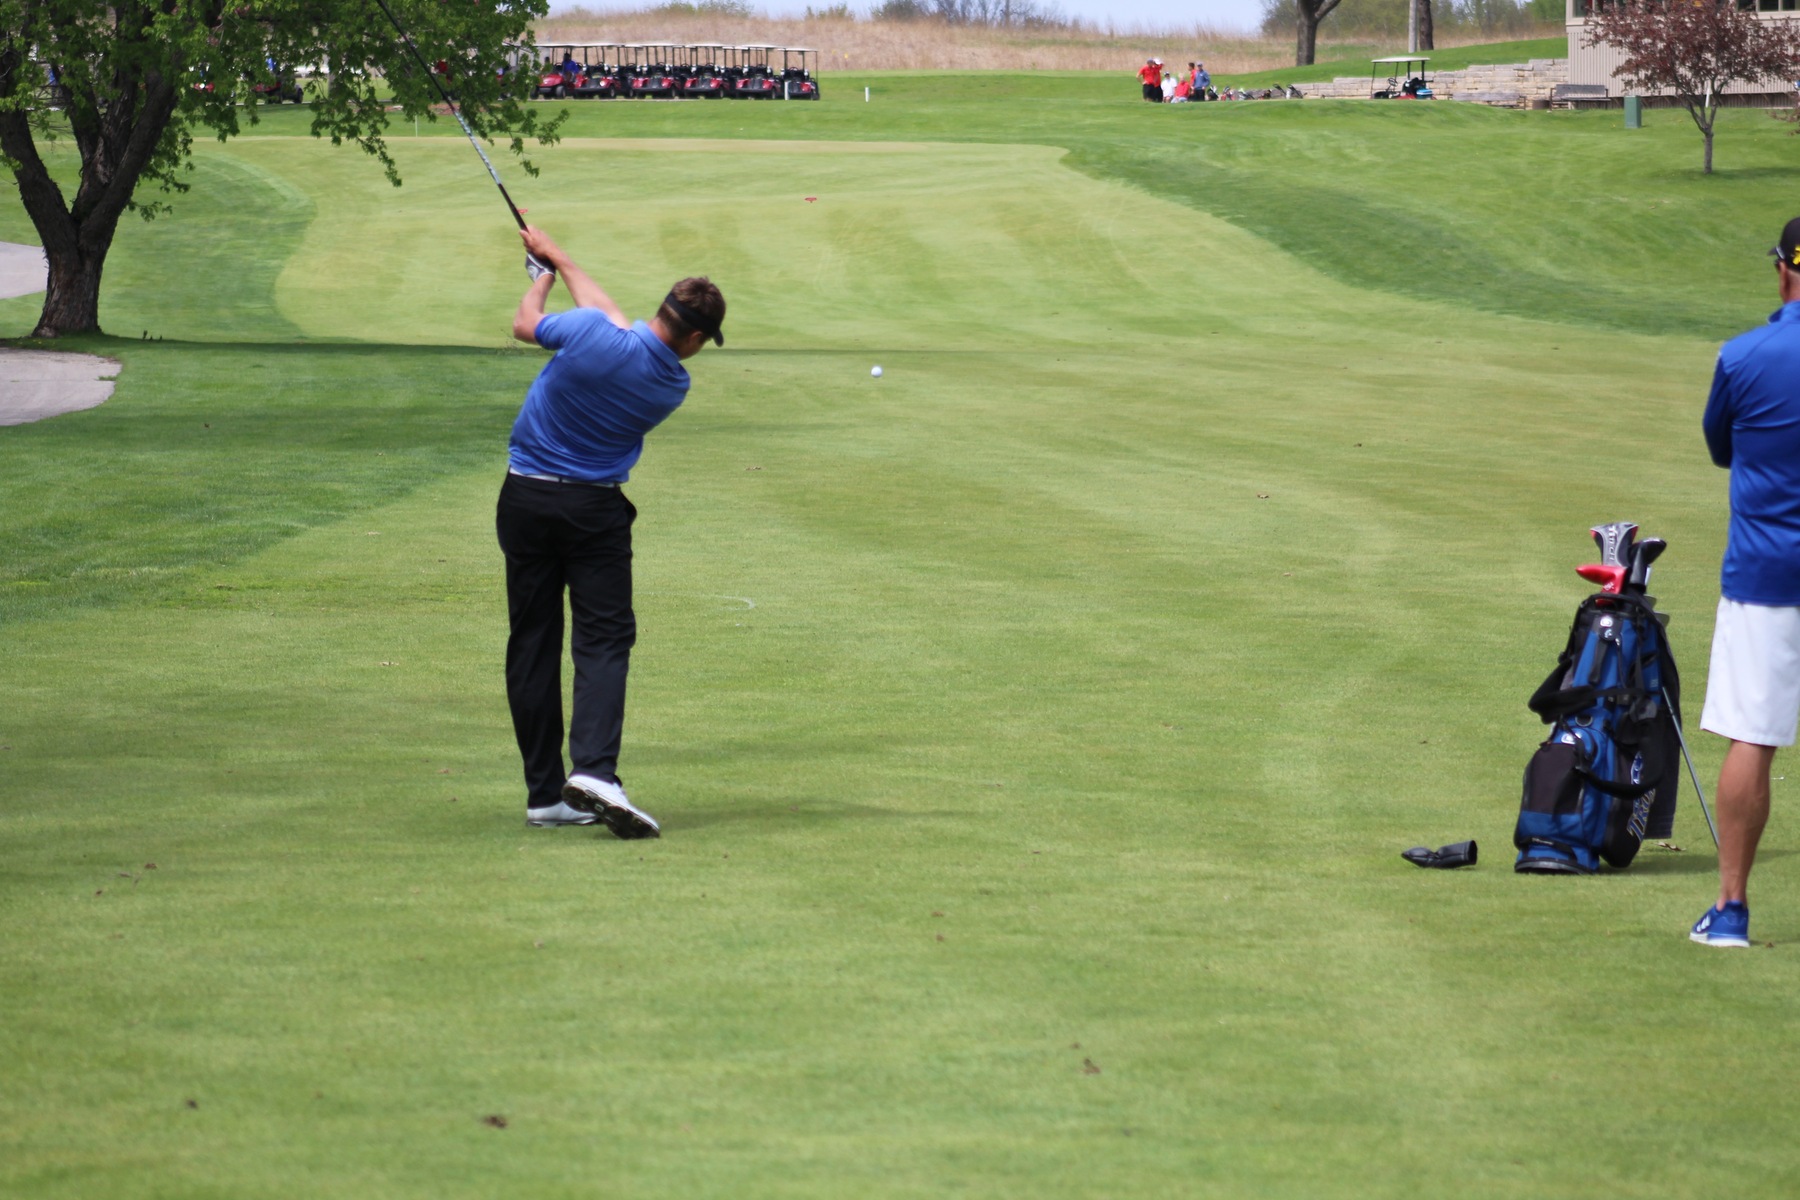 Ben Boerjan hits his second shot toward the 18th green on Monday during the regional tournament in Ames.